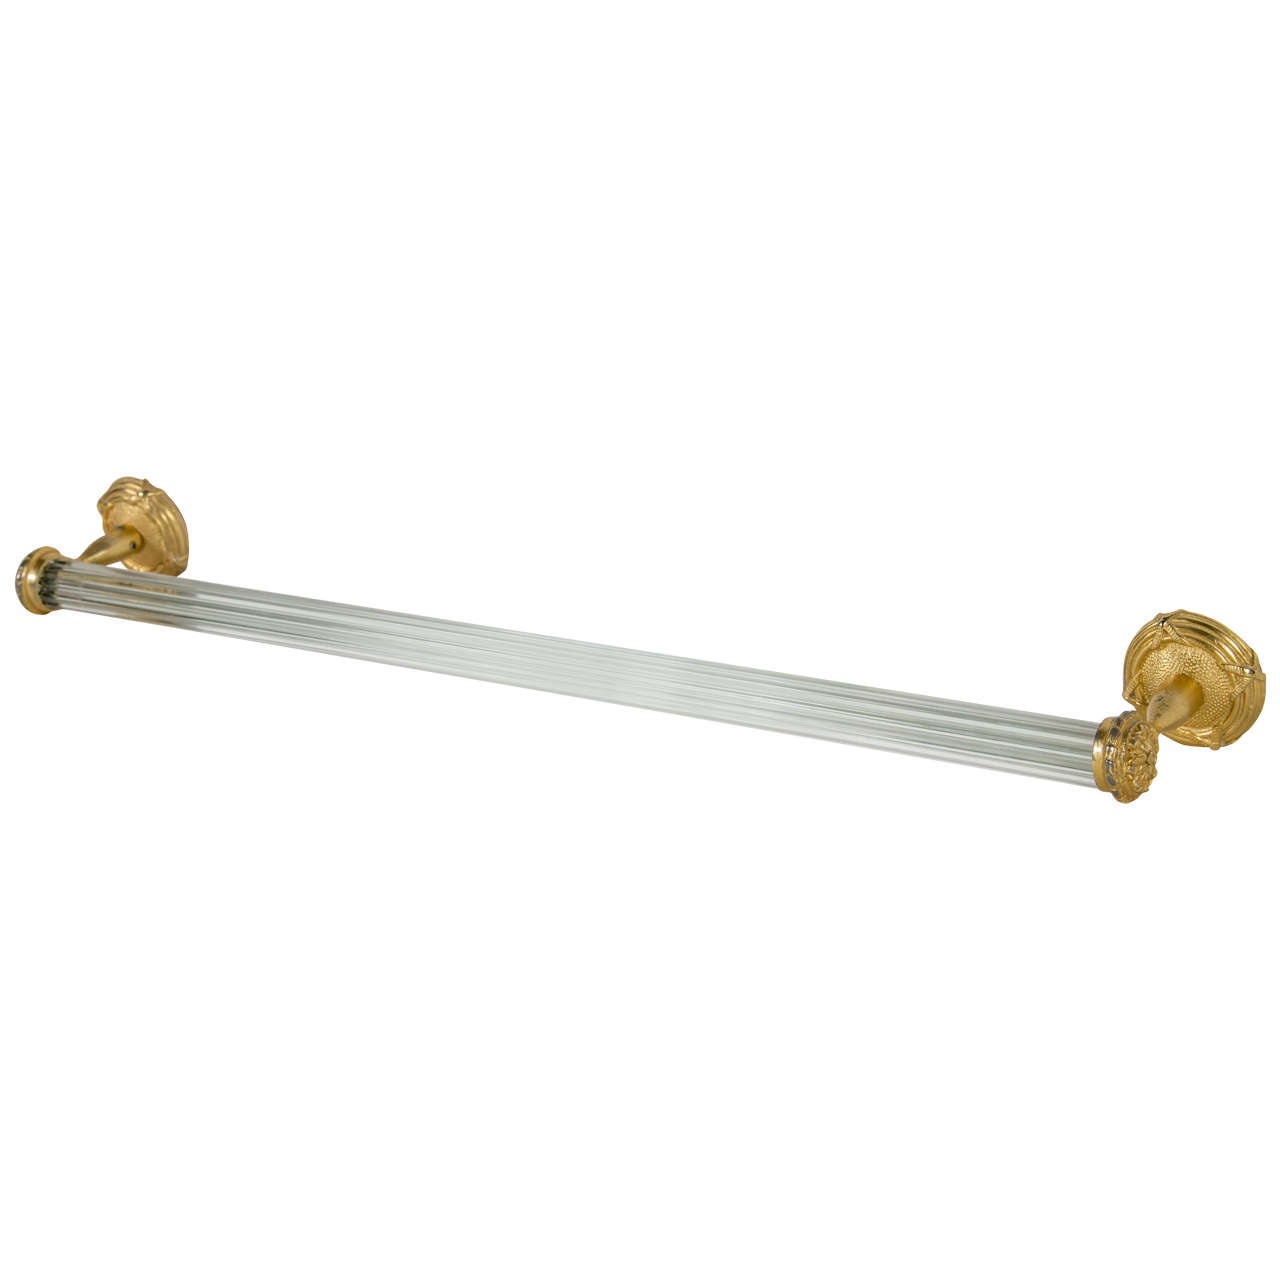 Elegant Glass Rod and Gilt Towel Rod by Sherle Wagner